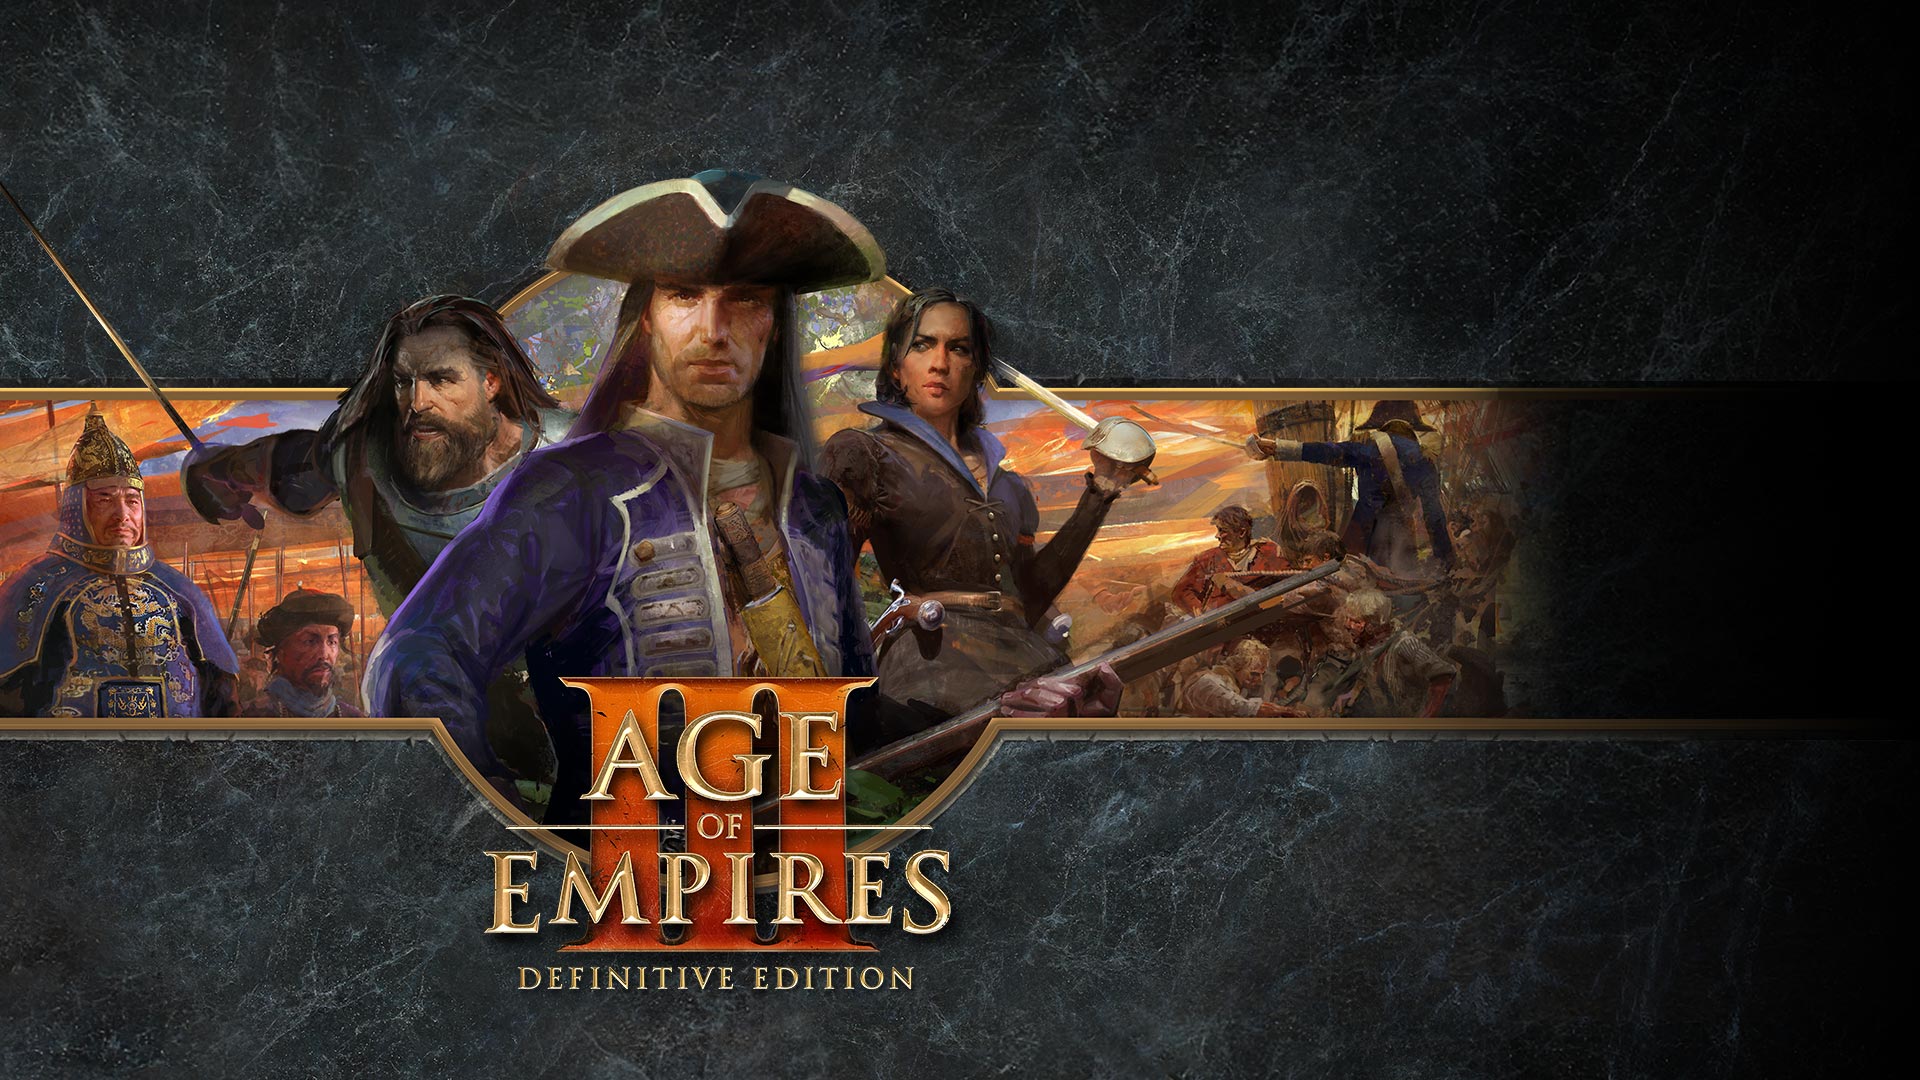 age of empires 3 steam keeps asking for product key